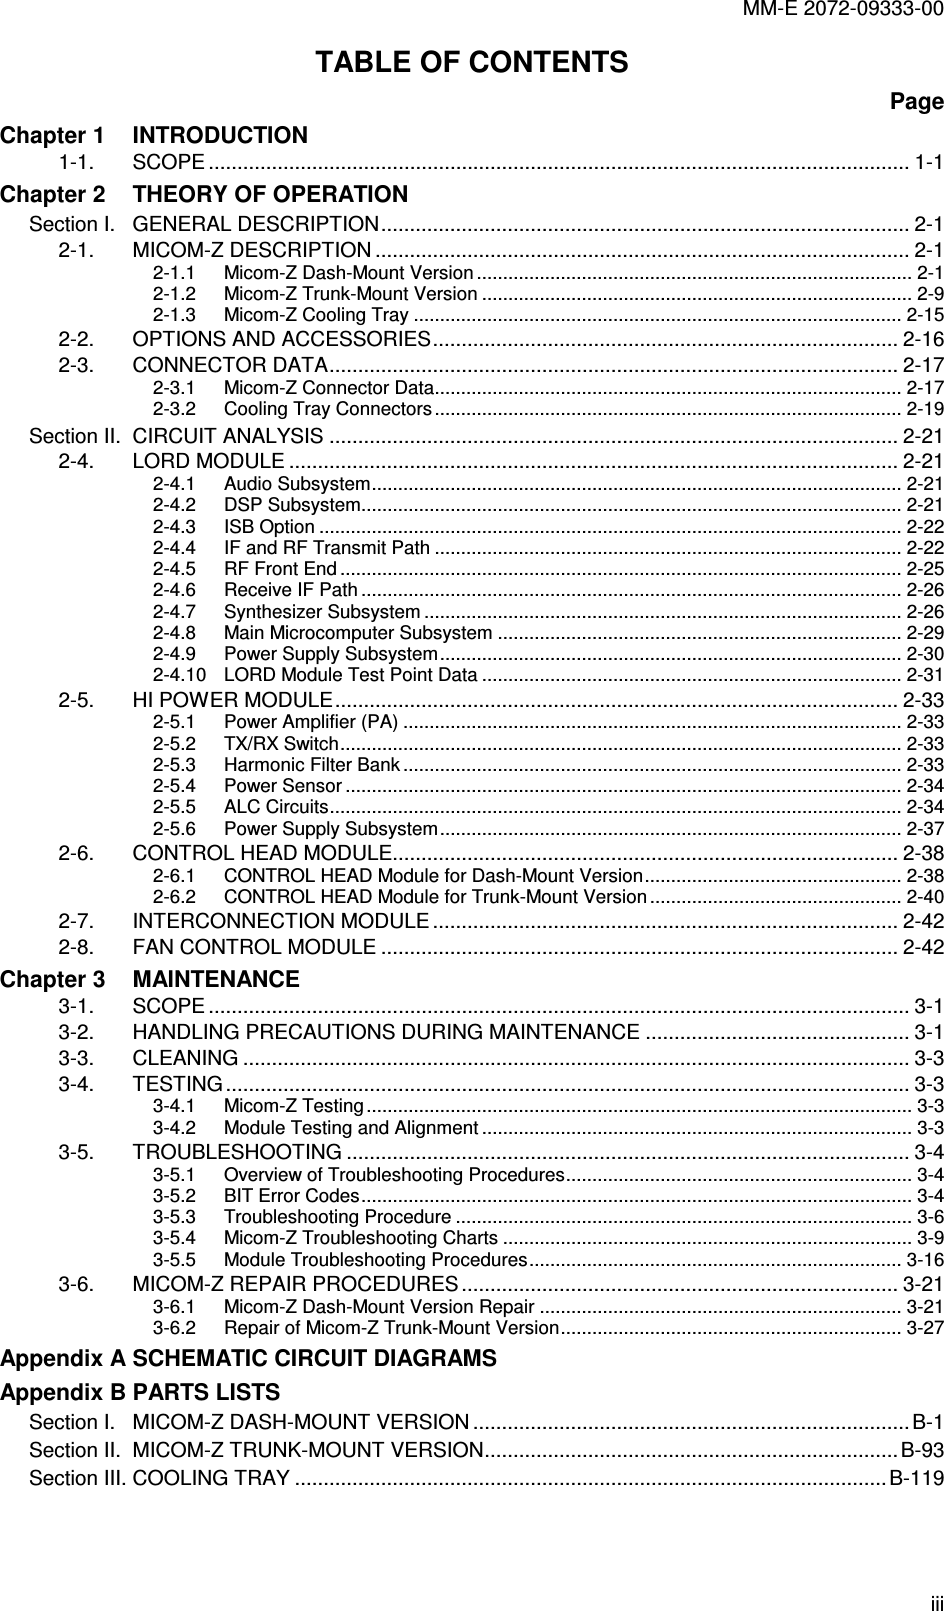 MM-E 2072-09333-00 iii TABLE OF CONTENTS Page Chapter 1  INTRODUCTION 1-1. SCOPE .......................................................................................................................... 1-1 Chapter 2  THEORY OF OPERATION Section I.   GENERAL DESCRIPTION............................................................................................ 2-1 2-1. MICOM-Z DESCRIPTION ............................................................................................. 2-1 2-1.1 Micom-Z Dash-Mount Version ................................................................................... 2-1 2-1.2 Micom-Z Trunk-Mount Version .................................................................................. 2-9 2-1.3 Micom-Z Cooling Tray ............................................................................................. 2-15 2-2. OPTIONS AND ACCESSORIES................................................................................. 2-16 2-3. CONNECTOR DATA................................................................................................... 2-17 2-3.1 Micom-Z Connector Data......................................................................................... 2-17 2-3.2 Cooling Tray Connectors ......................................................................................... 2-19 Section II.  CIRCUIT ANALYSIS ................................................................................................... 2-21 2-4. LORD MODULE .......................................................................................................... 2-21 2-4.1 Audio Subsystem..................................................................................................... 2-21 2-4.2 DSP Subsystem....................................................................................................... 2-21 2-4.3 ISB Option ............................................................................................................... 2-22 2-4.4 IF and RF Transmit Path ......................................................................................... 2-22 2-4.5 RF Front End ........................................................................................................... 2-25 2-4.6 Receive IF Path ....................................................................................................... 2-26 2-4.7 Synthesizer Subsystem ........................................................................................... 2-26 2-4.8 Main Microcomputer Subsystem ............................................................................. 2-29 2-4.9 Power Supply Subsystem........................................................................................ 2-30 2-4.10 LORD Module Test Point Data ................................................................................ 2-31 2-5. HI POWER MODULE.................................................................................................. 2-33 2-5.1 Power Amplifier (PA) ............................................................................................... 2-33 2-5.2 TX/RX Switch........................................................................................................... 2-33 2-5.3 Harmonic Filter Bank ............................................................................................... 2-33 2-5.4 Power Sensor .......................................................................................................... 2-34 2-5.5 ALC Circuits............................................................................................................. 2-34 2-5.6 Power Supply Subsystem........................................................................................ 2-37 2-6. CONTROL HEAD MODULE........................................................................................ 2-38 2-6.1 CONTROL HEAD Module for Dash-Mount Version................................................. 2-38 2-6.2 CONTROL HEAD Module for Trunk-Mount Version ................................................ 2-40 2-7. INTERCONNECTION MODULE ................................................................................. 2-42 2-8. FAN CONTROL MODULE .......................................................................................... 2-42 Chapter 3  MAINTENANCE 3-1. SCOPE .......................................................................................................................... 3-1 3-2. HANDLING PRECAUTIONS DURING MAINTENANCE .............................................. 3-1 3-3. CLEANING .................................................................................................................... 3-3 3-4. TESTING ....................................................................................................................... 3-3 3-4.1 Micom-Z Testing ........................................................................................................ 3-3 3-4.2 Module Testing and Alignment .................................................................................. 3-3 3-5. TROUBLESHOOTING .................................................................................................. 3-4 3-5.1 Overview of Troubleshooting Procedures.................................................................. 3-4 3-5.2 BIT Error Codes......................................................................................................... 3-4 3-5.3 Troubleshooting Procedure ....................................................................................... 3-6 3-5.4 Micom-Z Troubleshooting Charts .............................................................................. 3-9 3-5.5 Module Troubleshooting Procedures....................................................................... 3-16 3-6. MICOM-Z REPAIR PROCEDURES ............................................................................ 3-21 3-6.1 Micom-Z Dash-Mount Version Repair ..................................................................... 3-21 3-6.2 Repair of Micom-Z Trunk-Mount Version................................................................. 3-27 Appendix A SCHEMATIC CIRCUIT DIAGRAMS Appendix B PARTS LISTS Section I.   MICOM-Z DASH-MOUNT VERSION ............................................................................B-1 Section II.  MICOM-Z TRUNK-MOUNT VERSION........................................................................B-93 Section III. COOLING TRAY .......................................................................................................B-119  